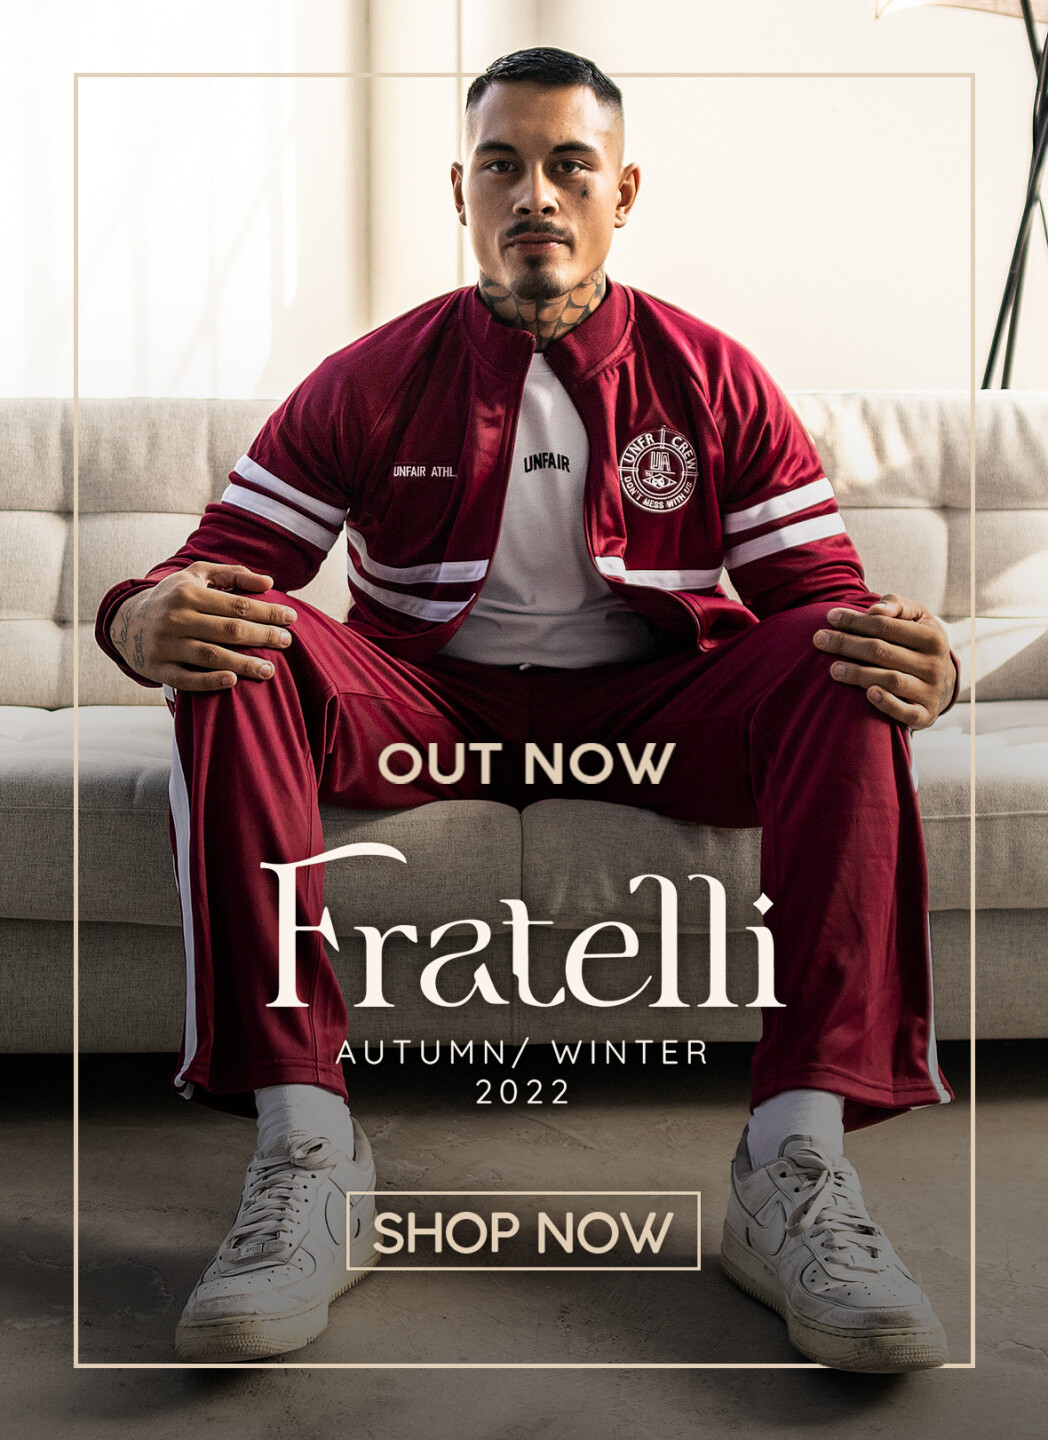 FRATELLI - AUTUMN/ WINTER 22 - OUT NOW